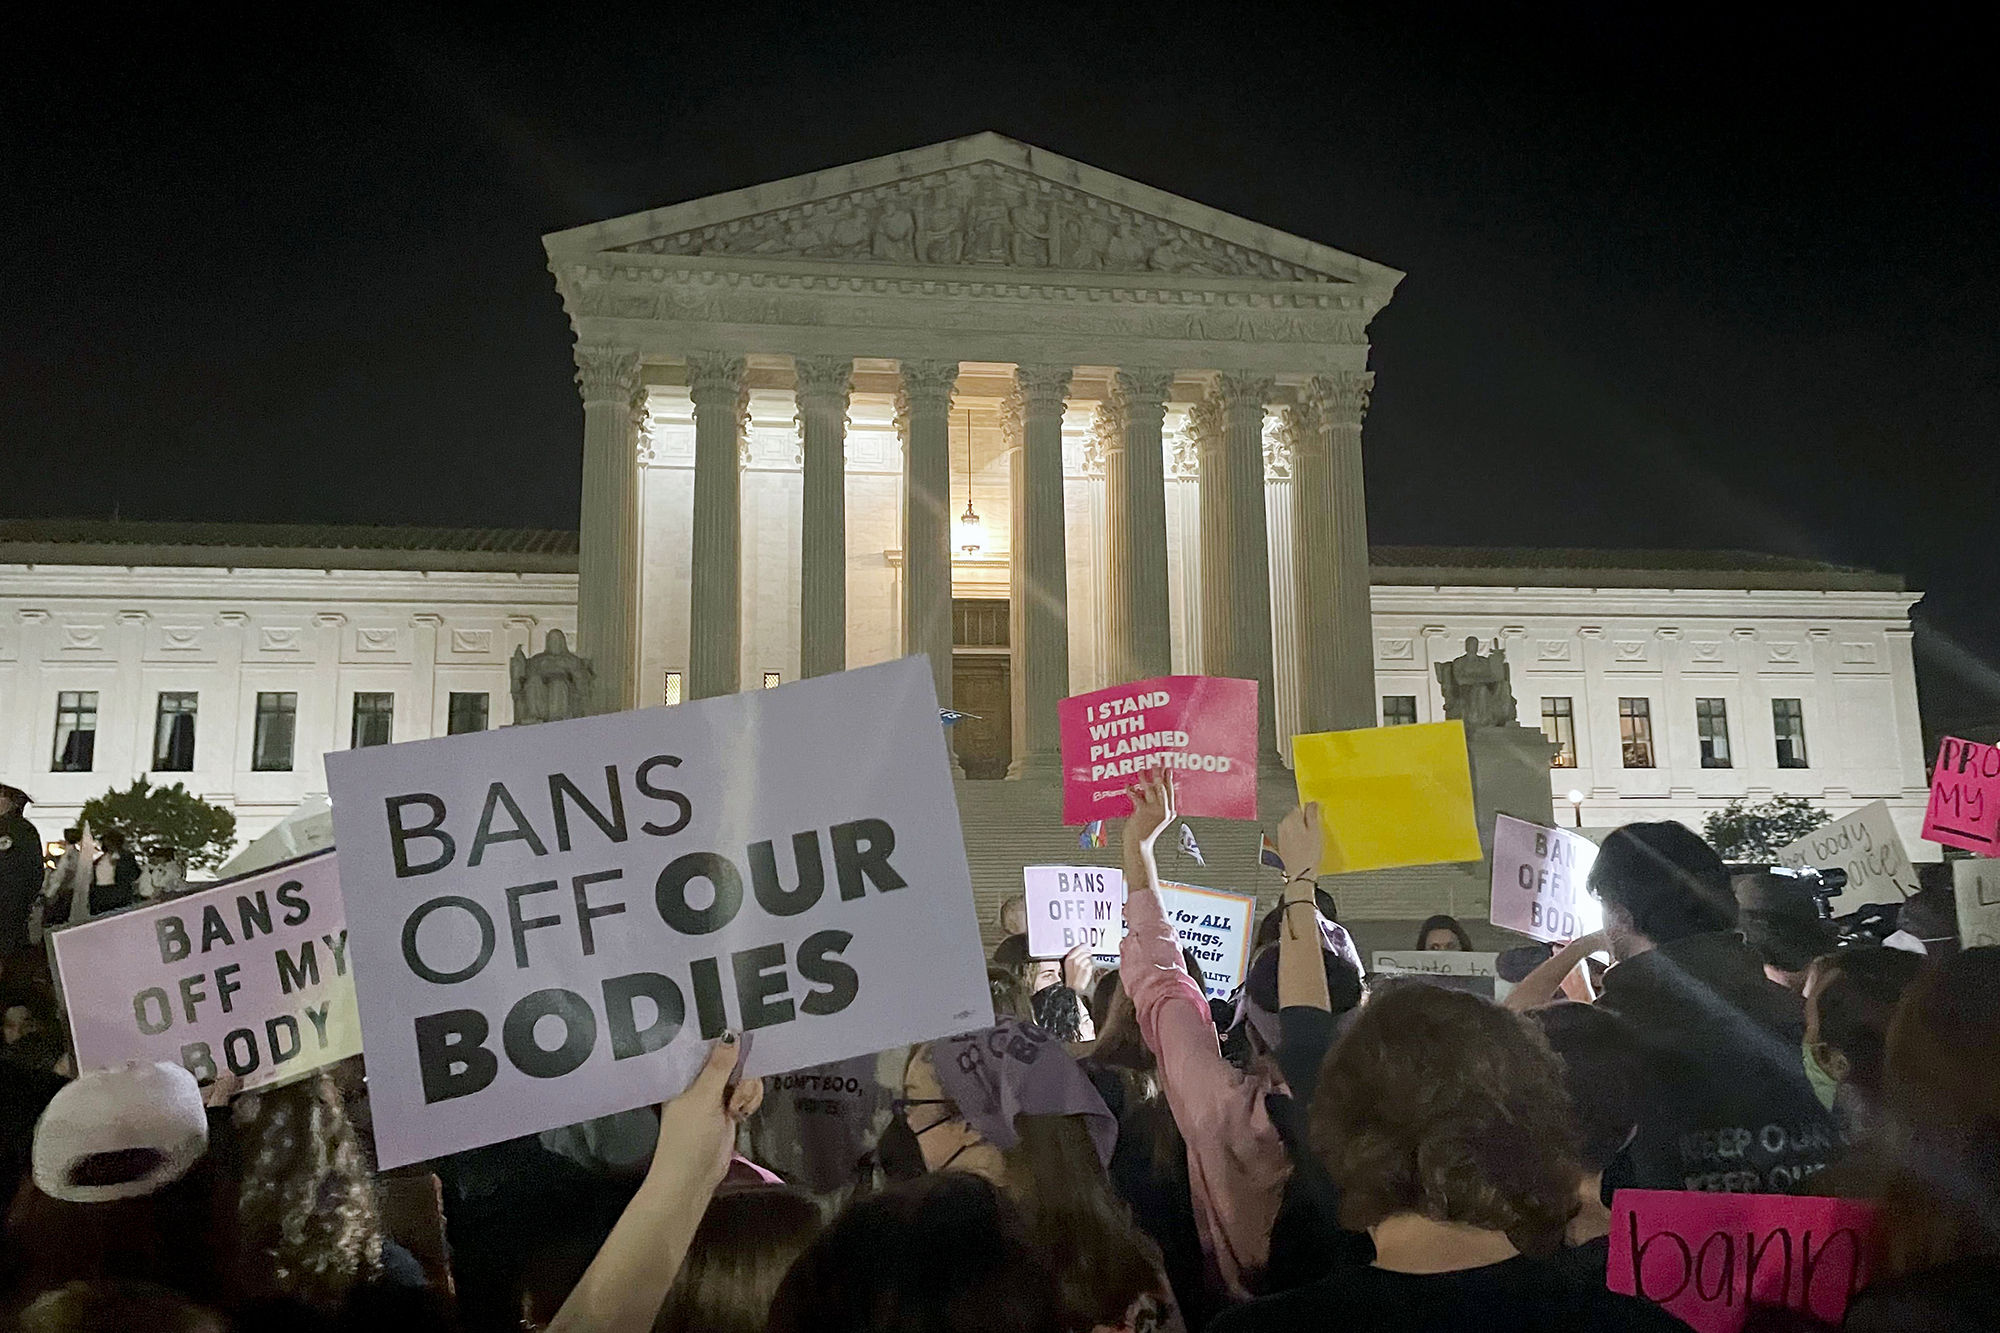 Crowd in front of U.S. Supreme Court at night holding pro-choice signs like BANS OFF OUR BODIES and I STAND WITH PLANNED PARENTHOOD.